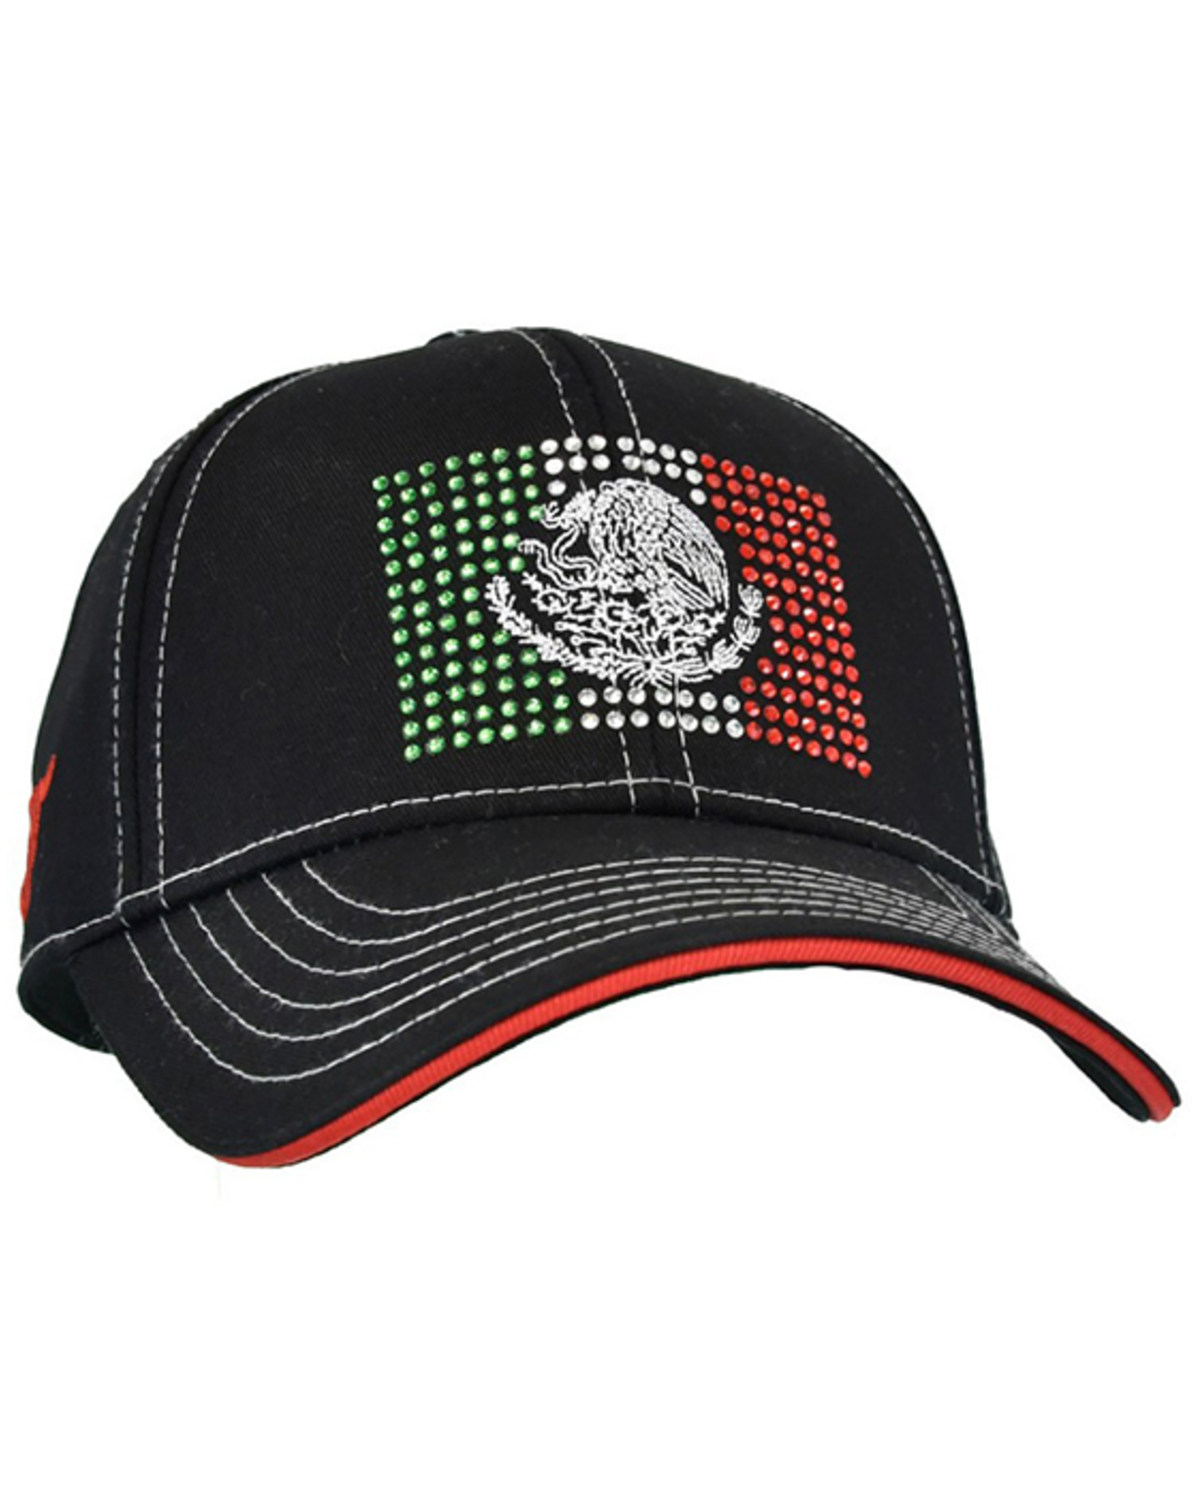 Cowgirl Hardware Women's Mexican Flag Crystal Ladies Baseball Cap